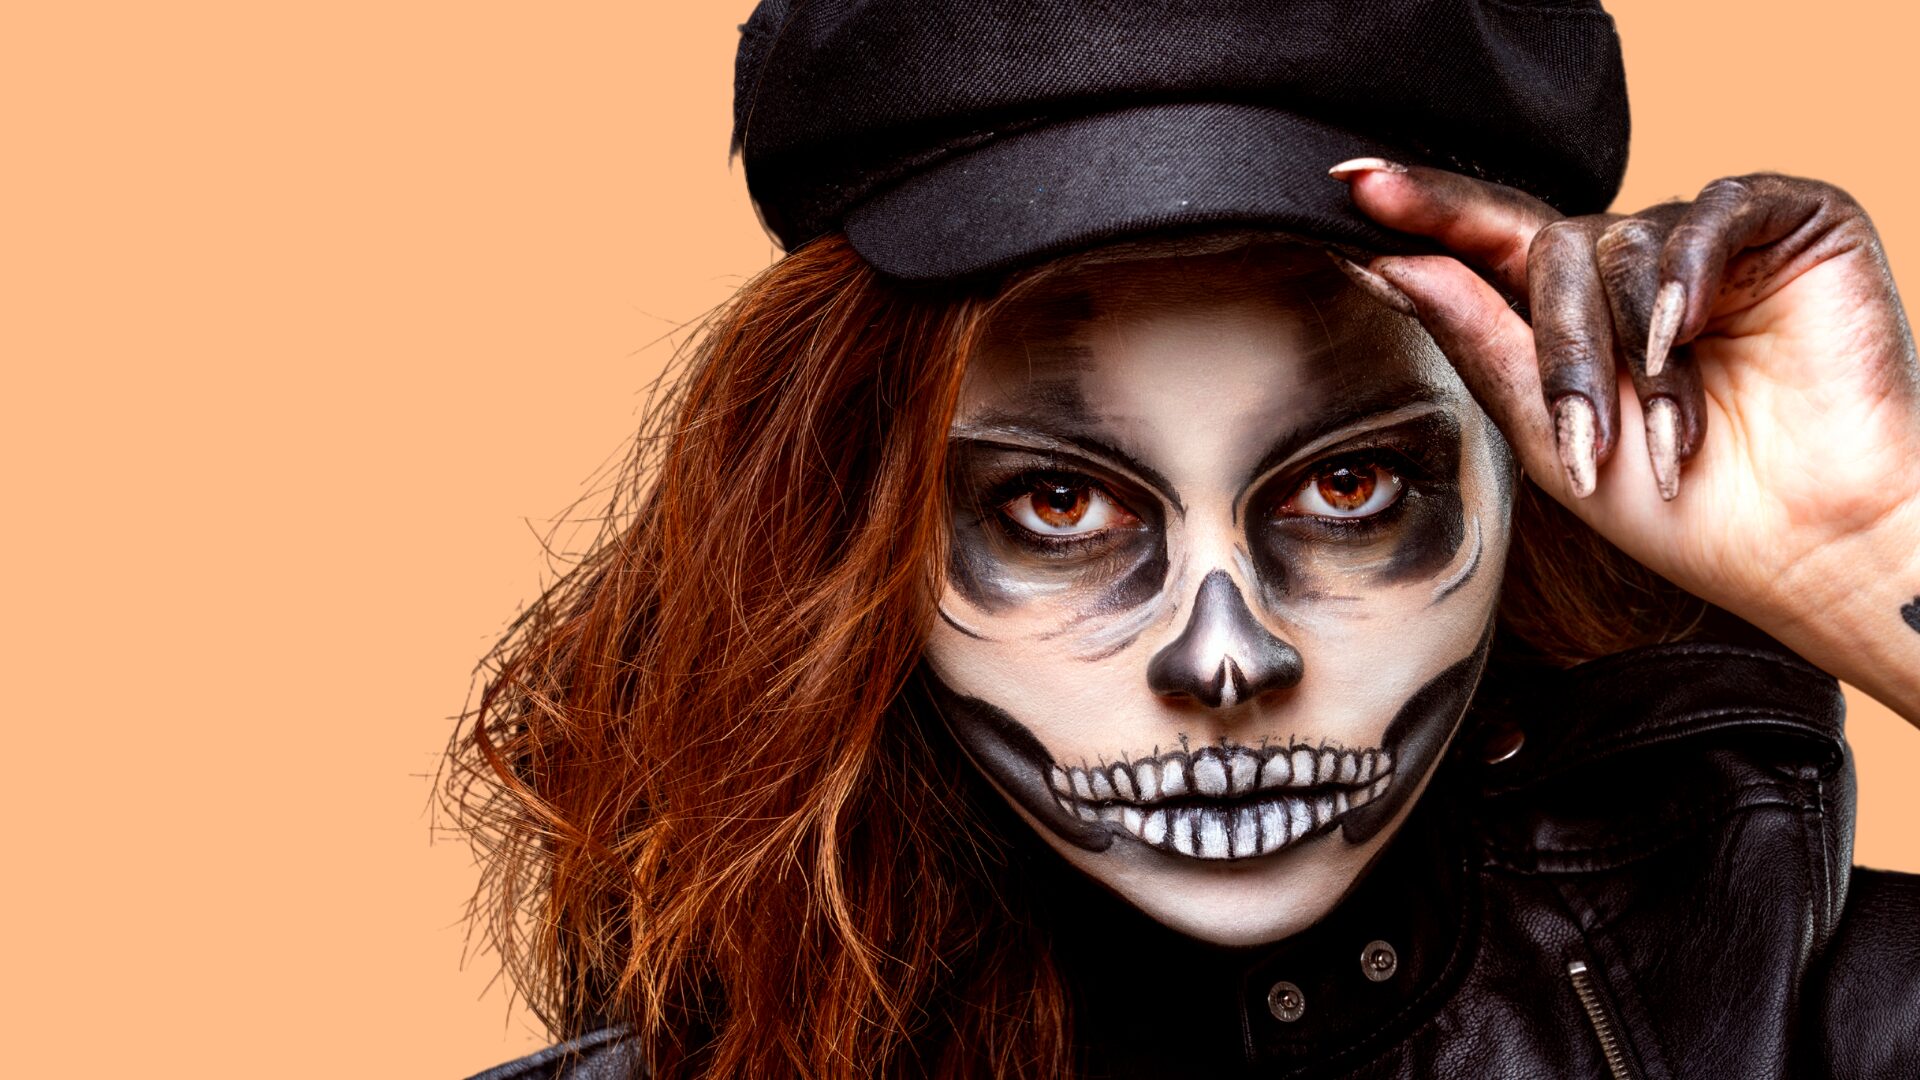 Redhead Makeup: How to Make Your Halloween Makeup Last All Night